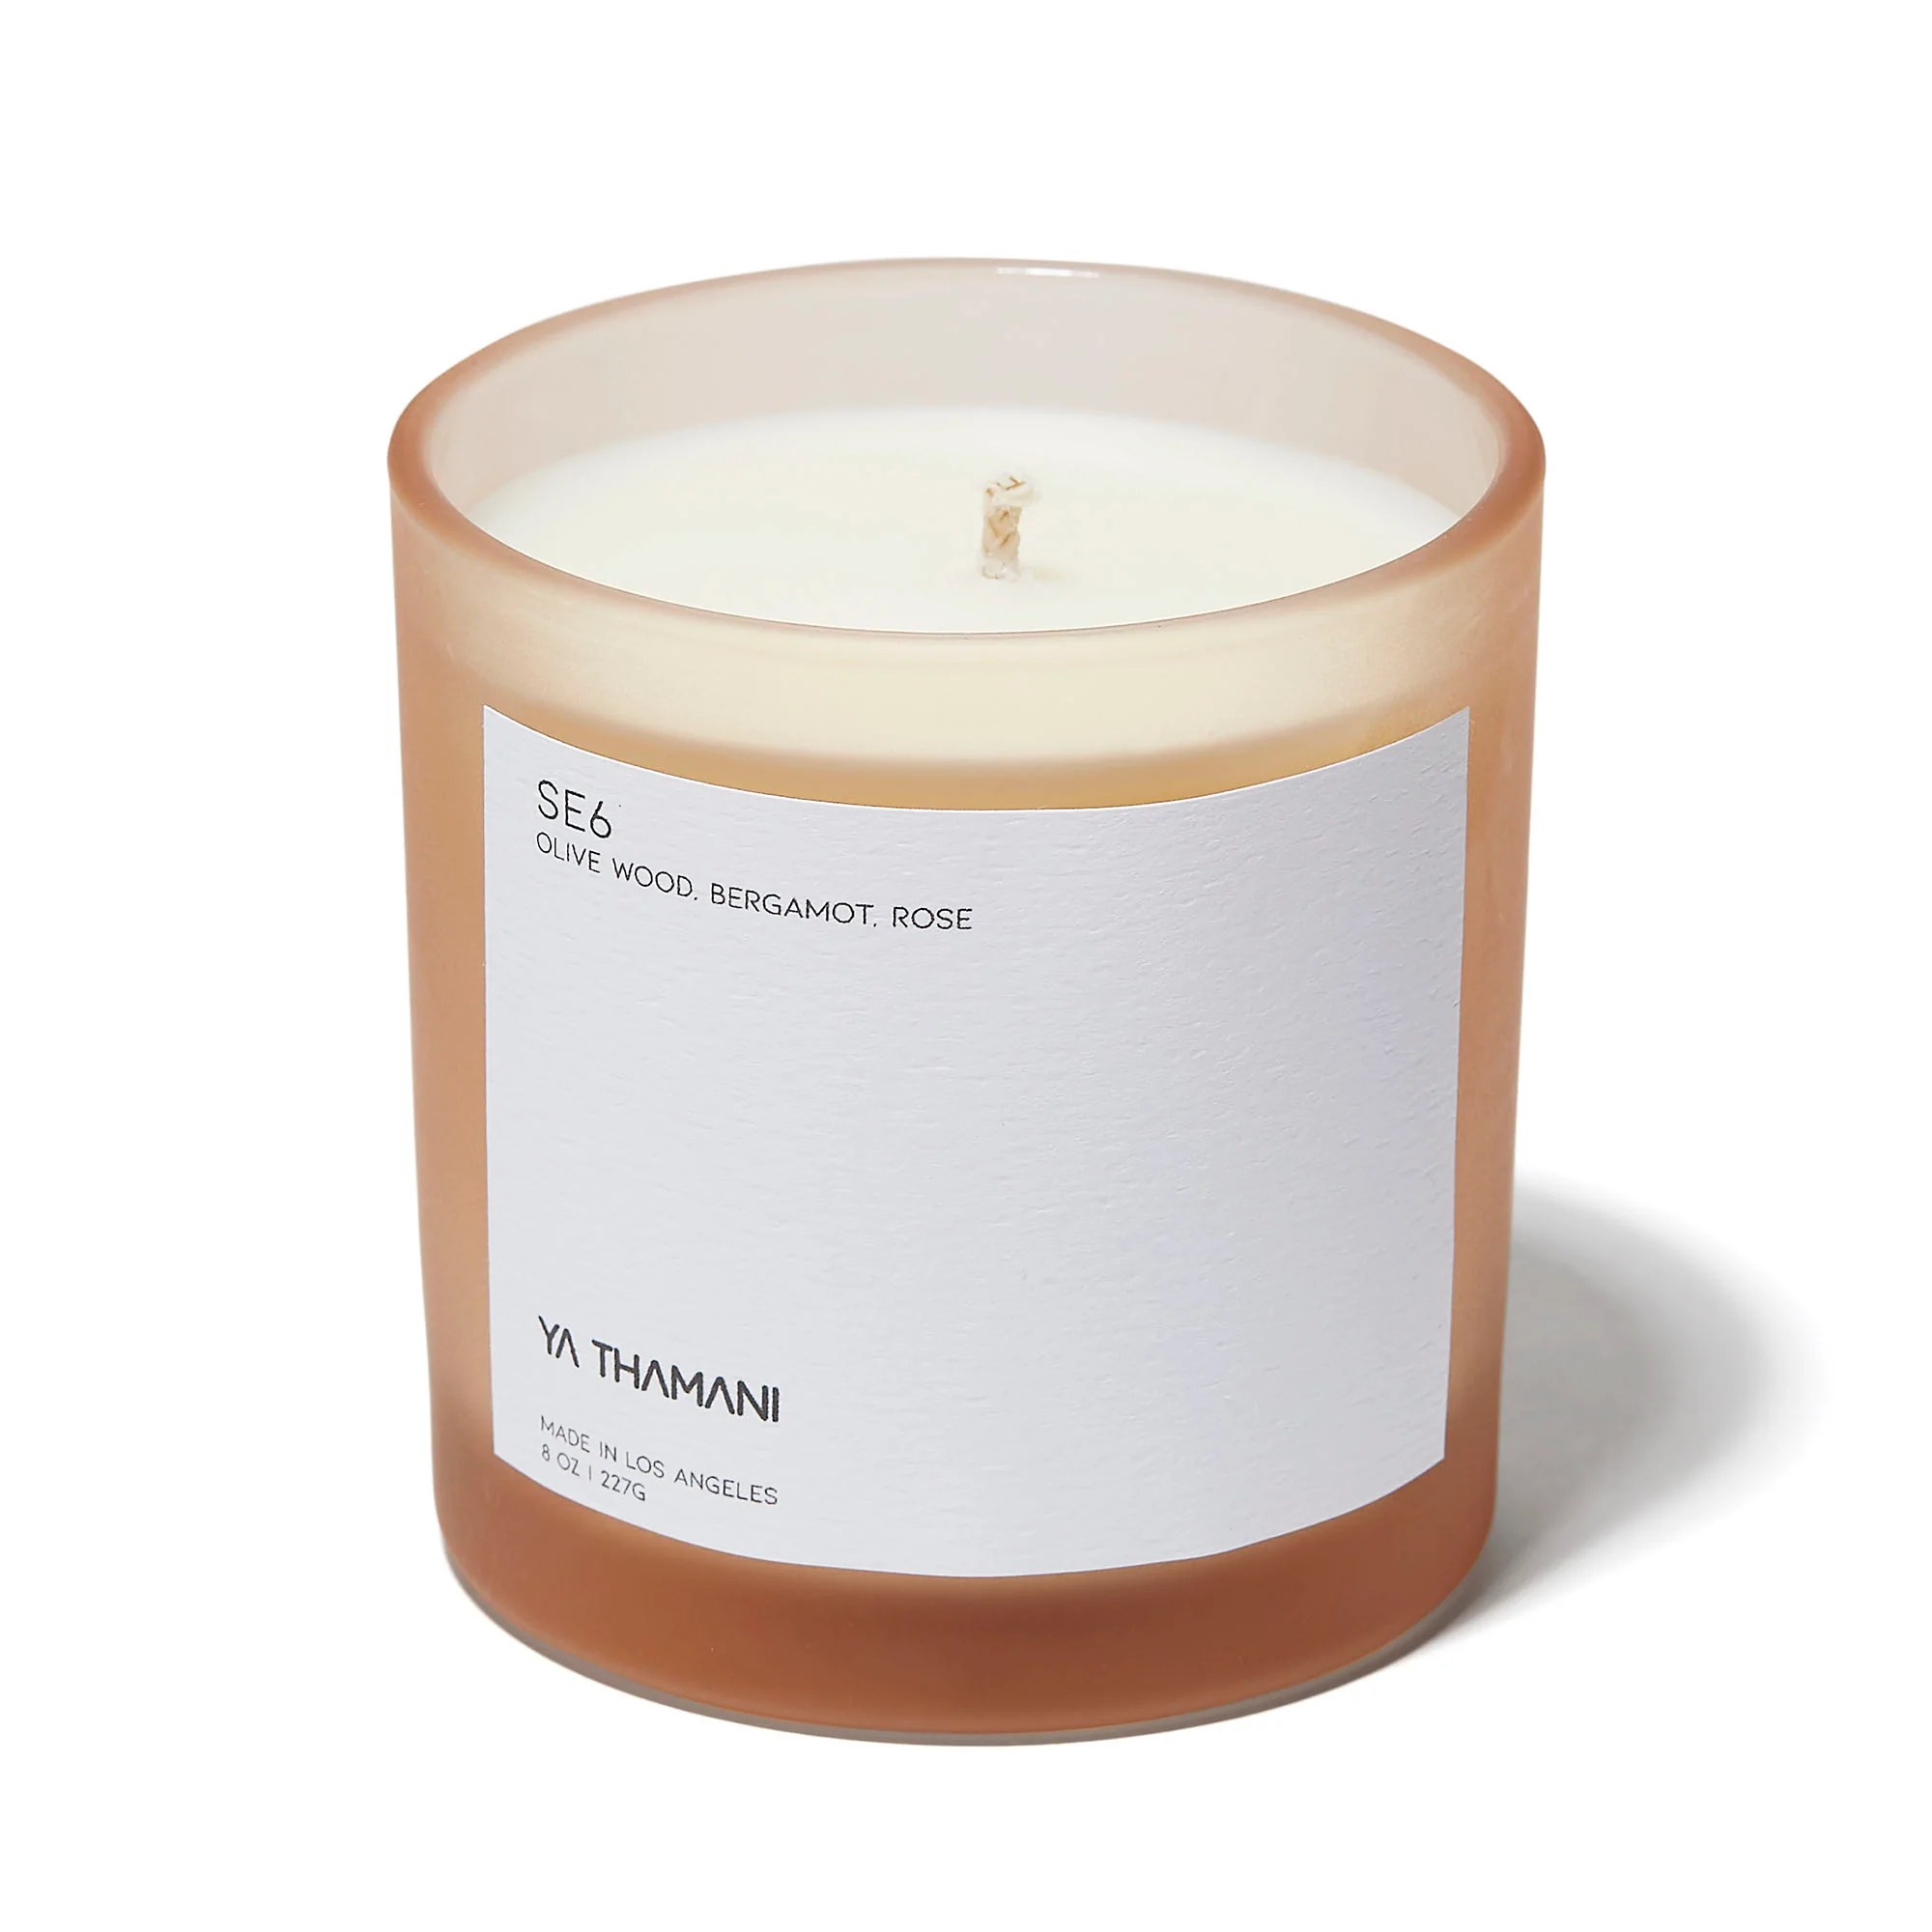 se6 candle one of the best valentine's day gifts for couples, on a white background